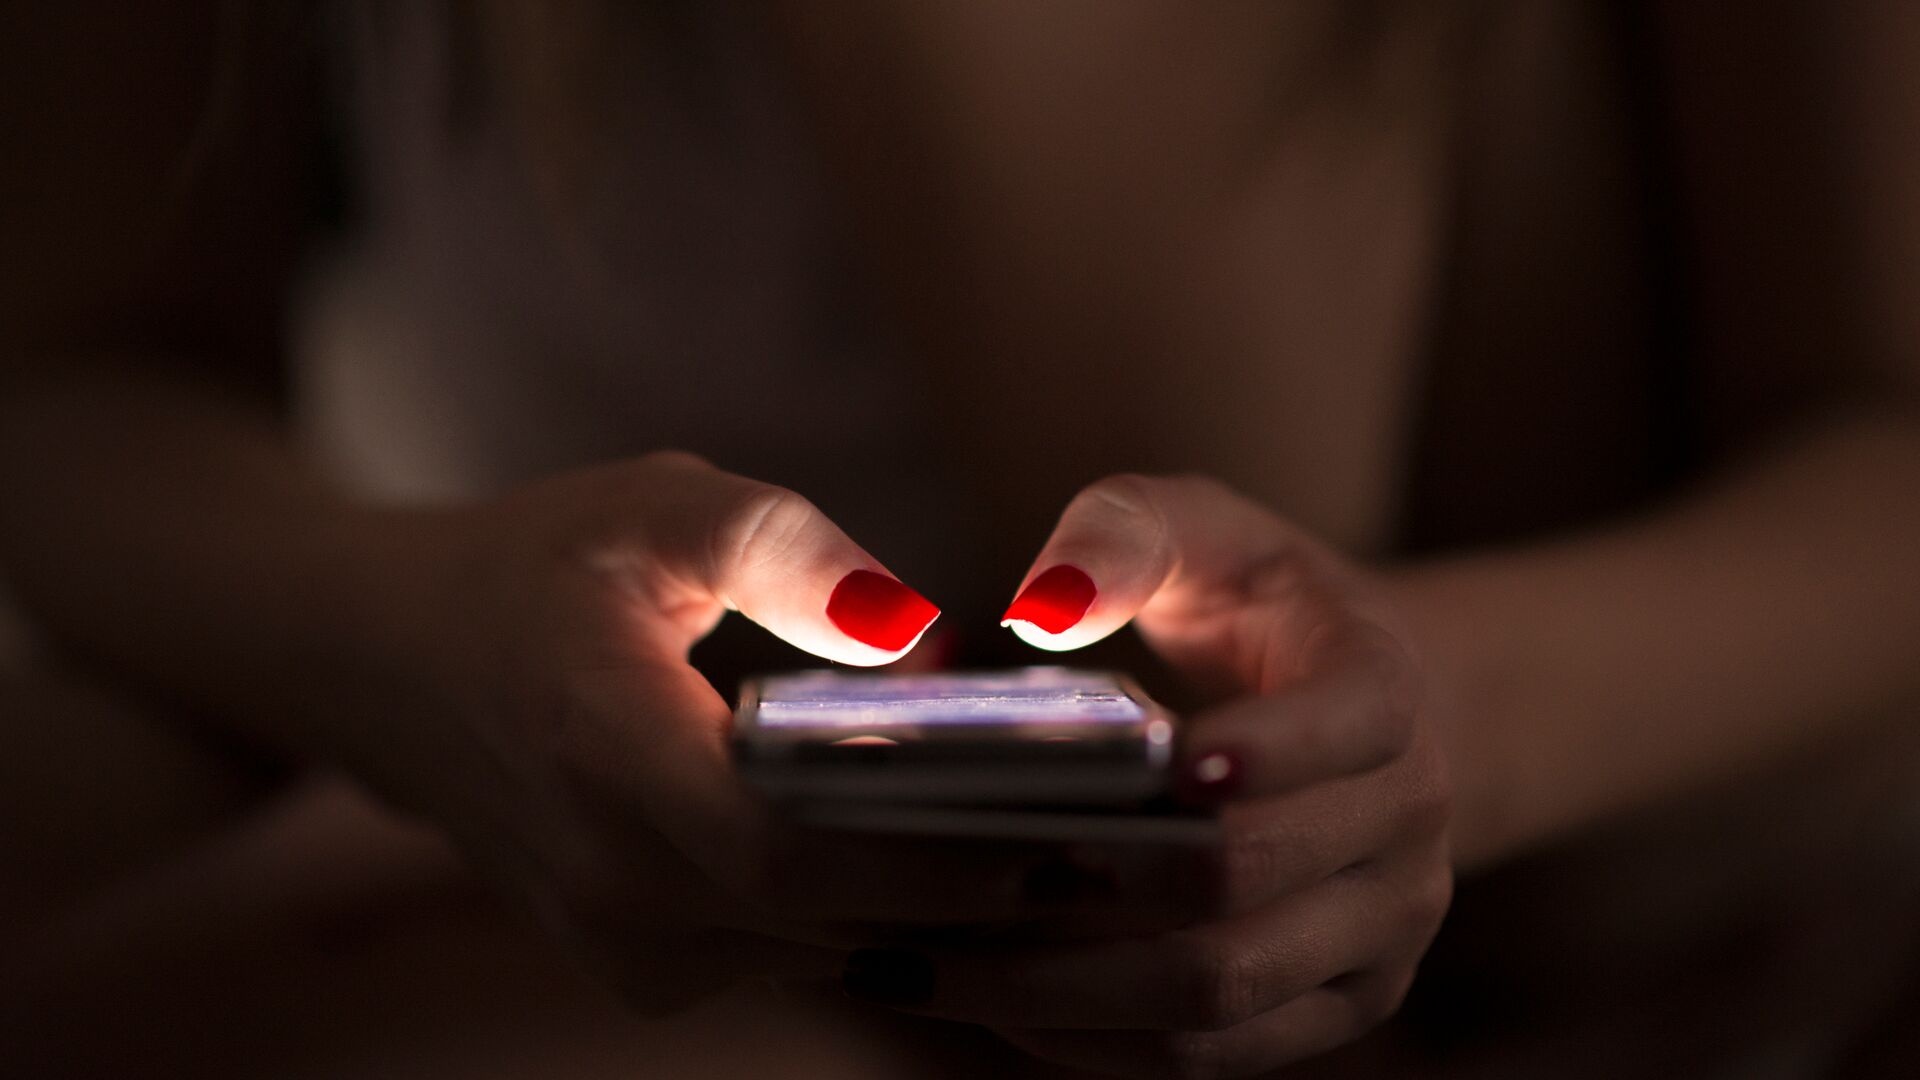 A woman using a cell phone in the dark. Her fingernails are painted bright red.